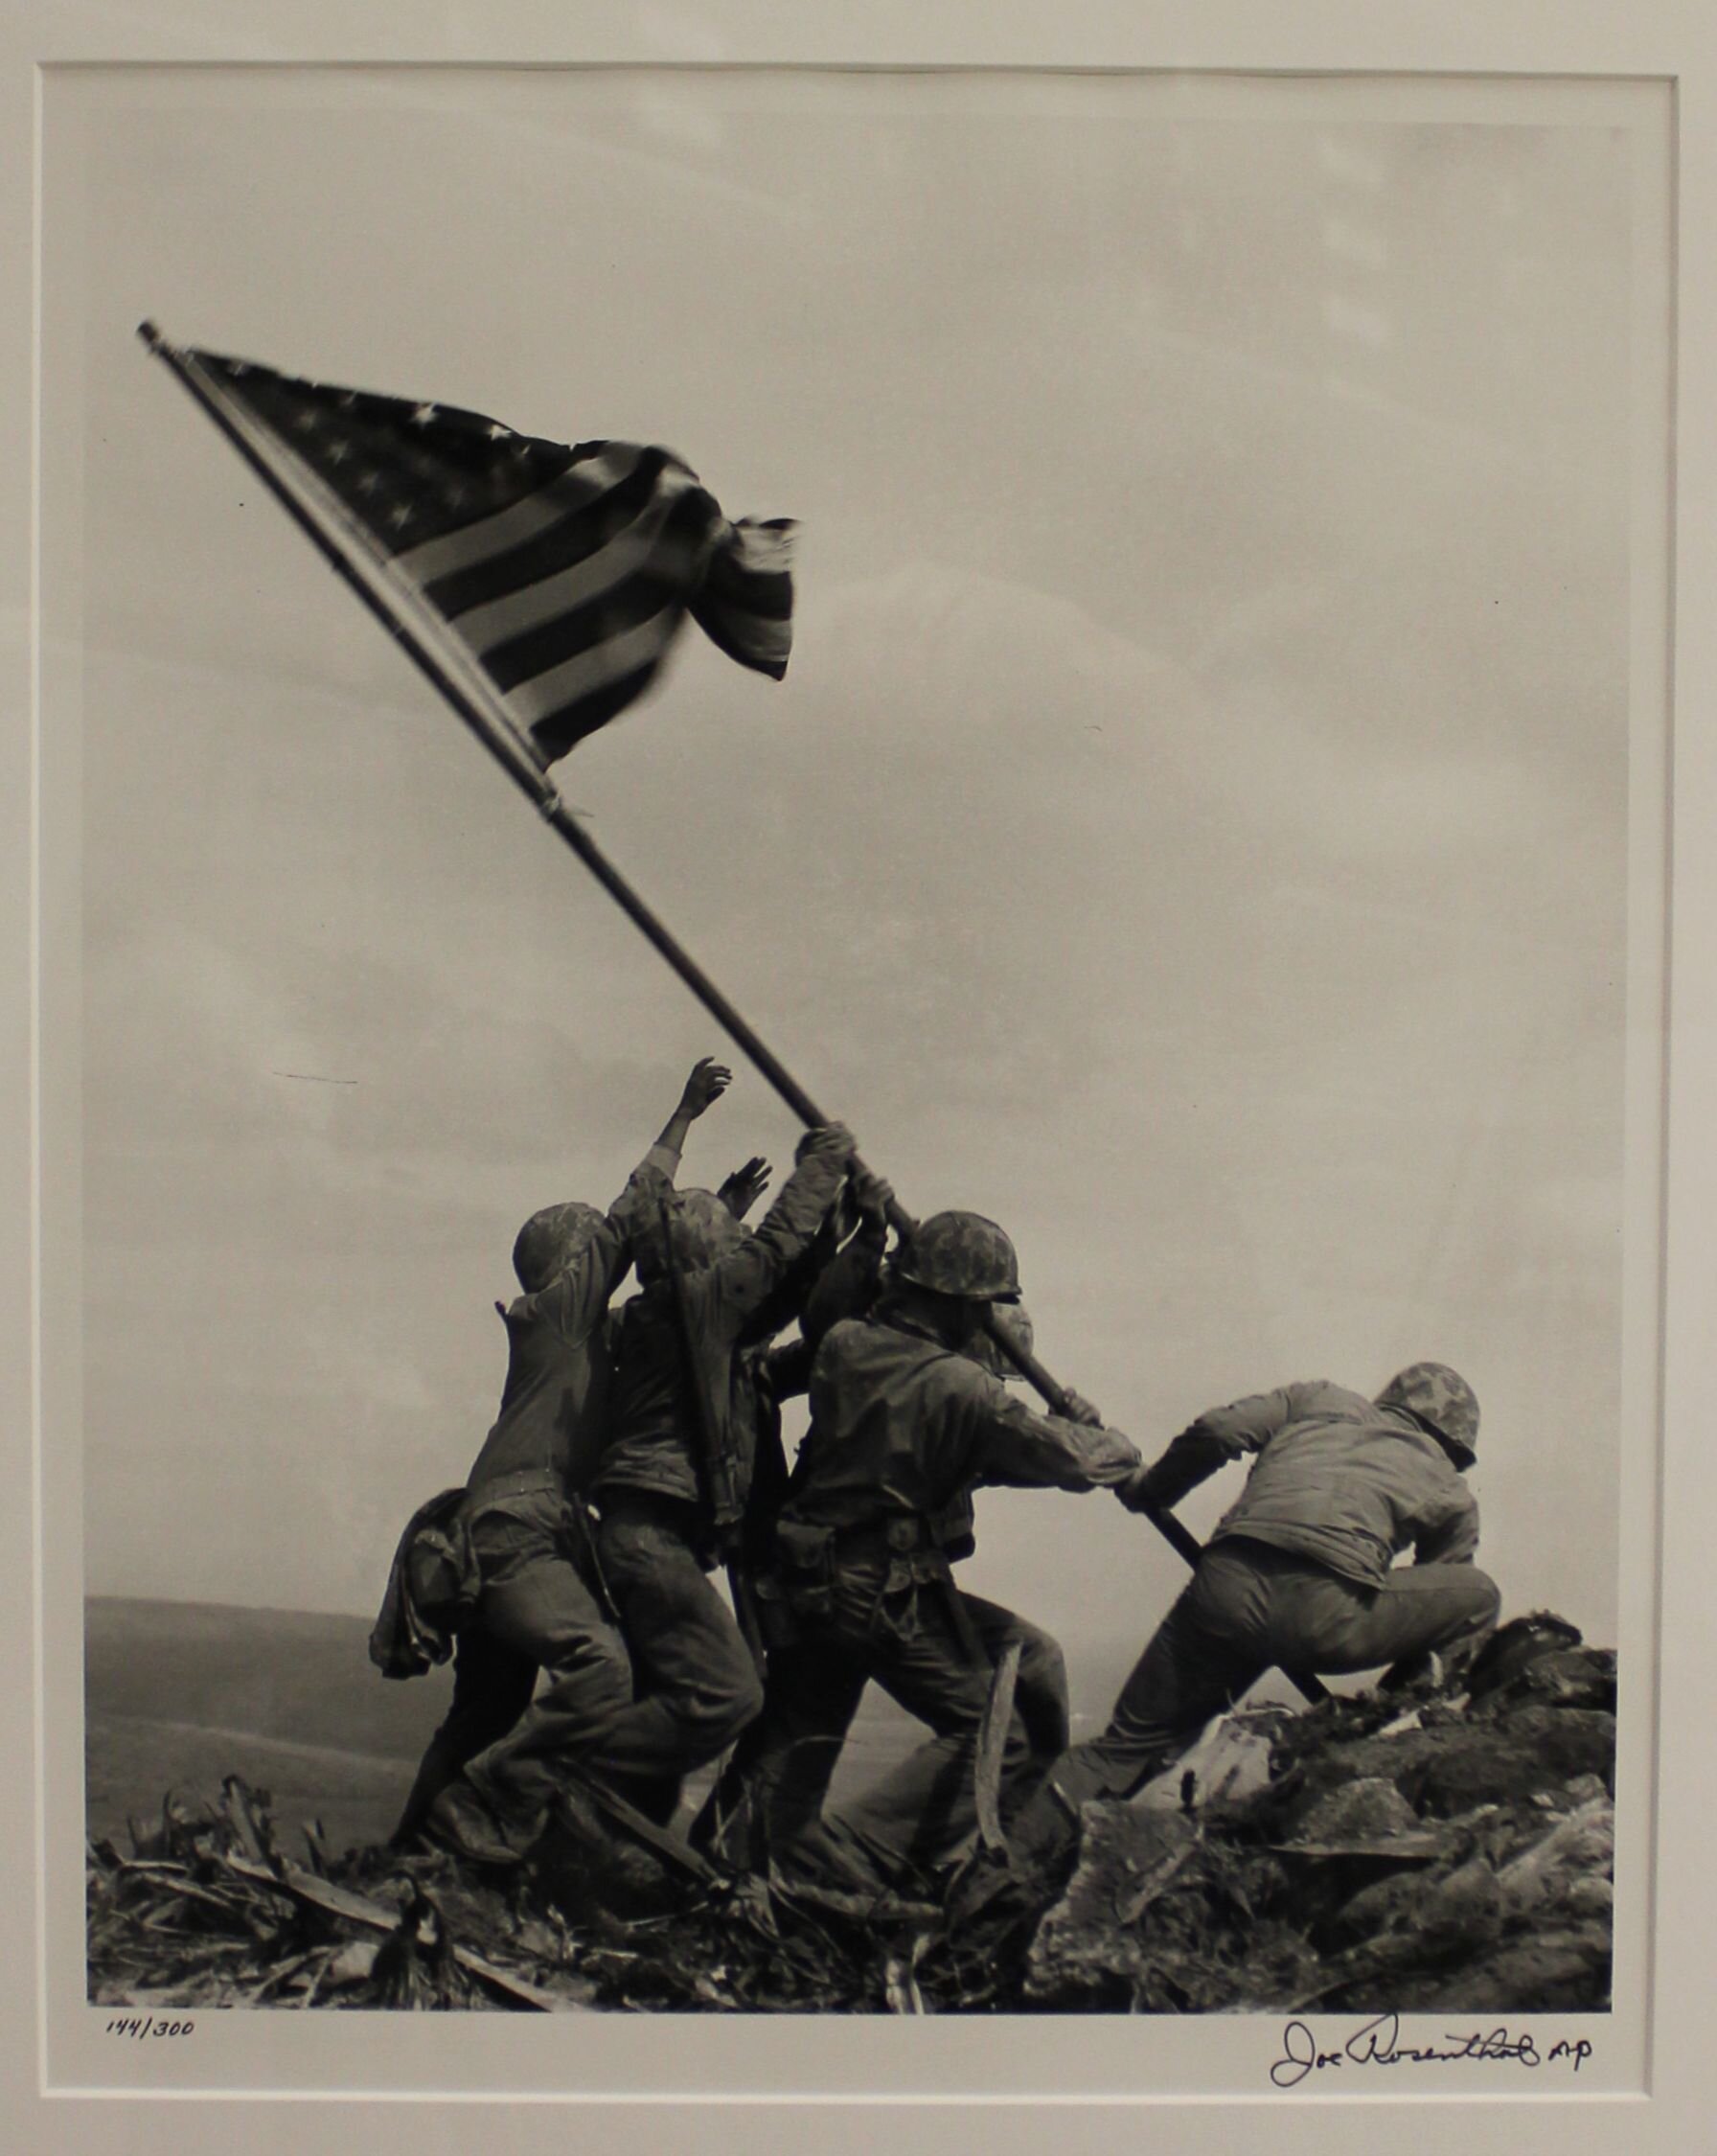 Joe Rosenthal, Marines of the 28th Regiment of the 5th Division raise the American flag atop Mr. Suribachi, Iwo Jima, February 23, 1945, Taken February 23, 1945/re-printed 1995, silver gelatin print Gift of Alice and Bill Wright